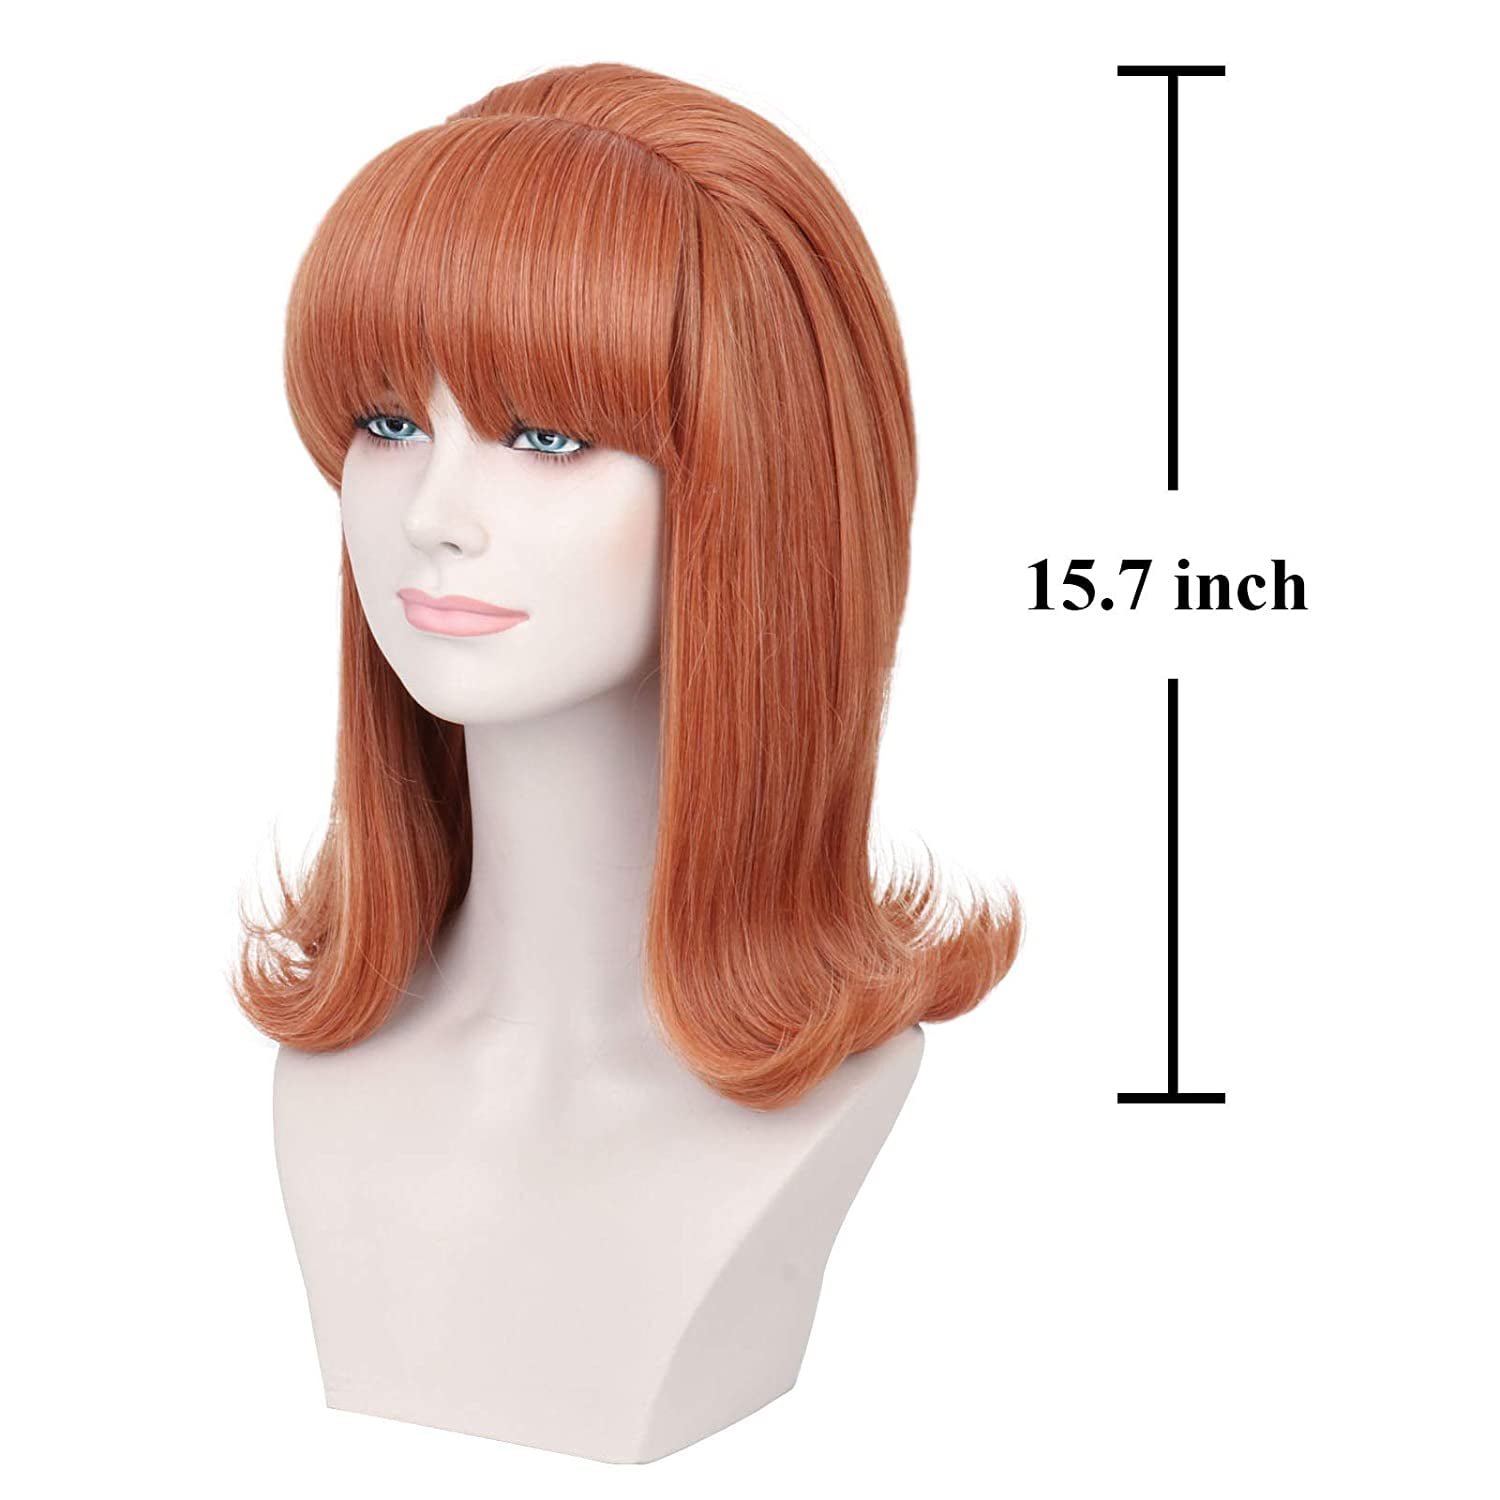 Missuhair 70s 80s Women Housewife Costume Wigs Wife Big Orange Hair Fits  Adults Kids Halloween Themed Party Wigs | Walmart Canada